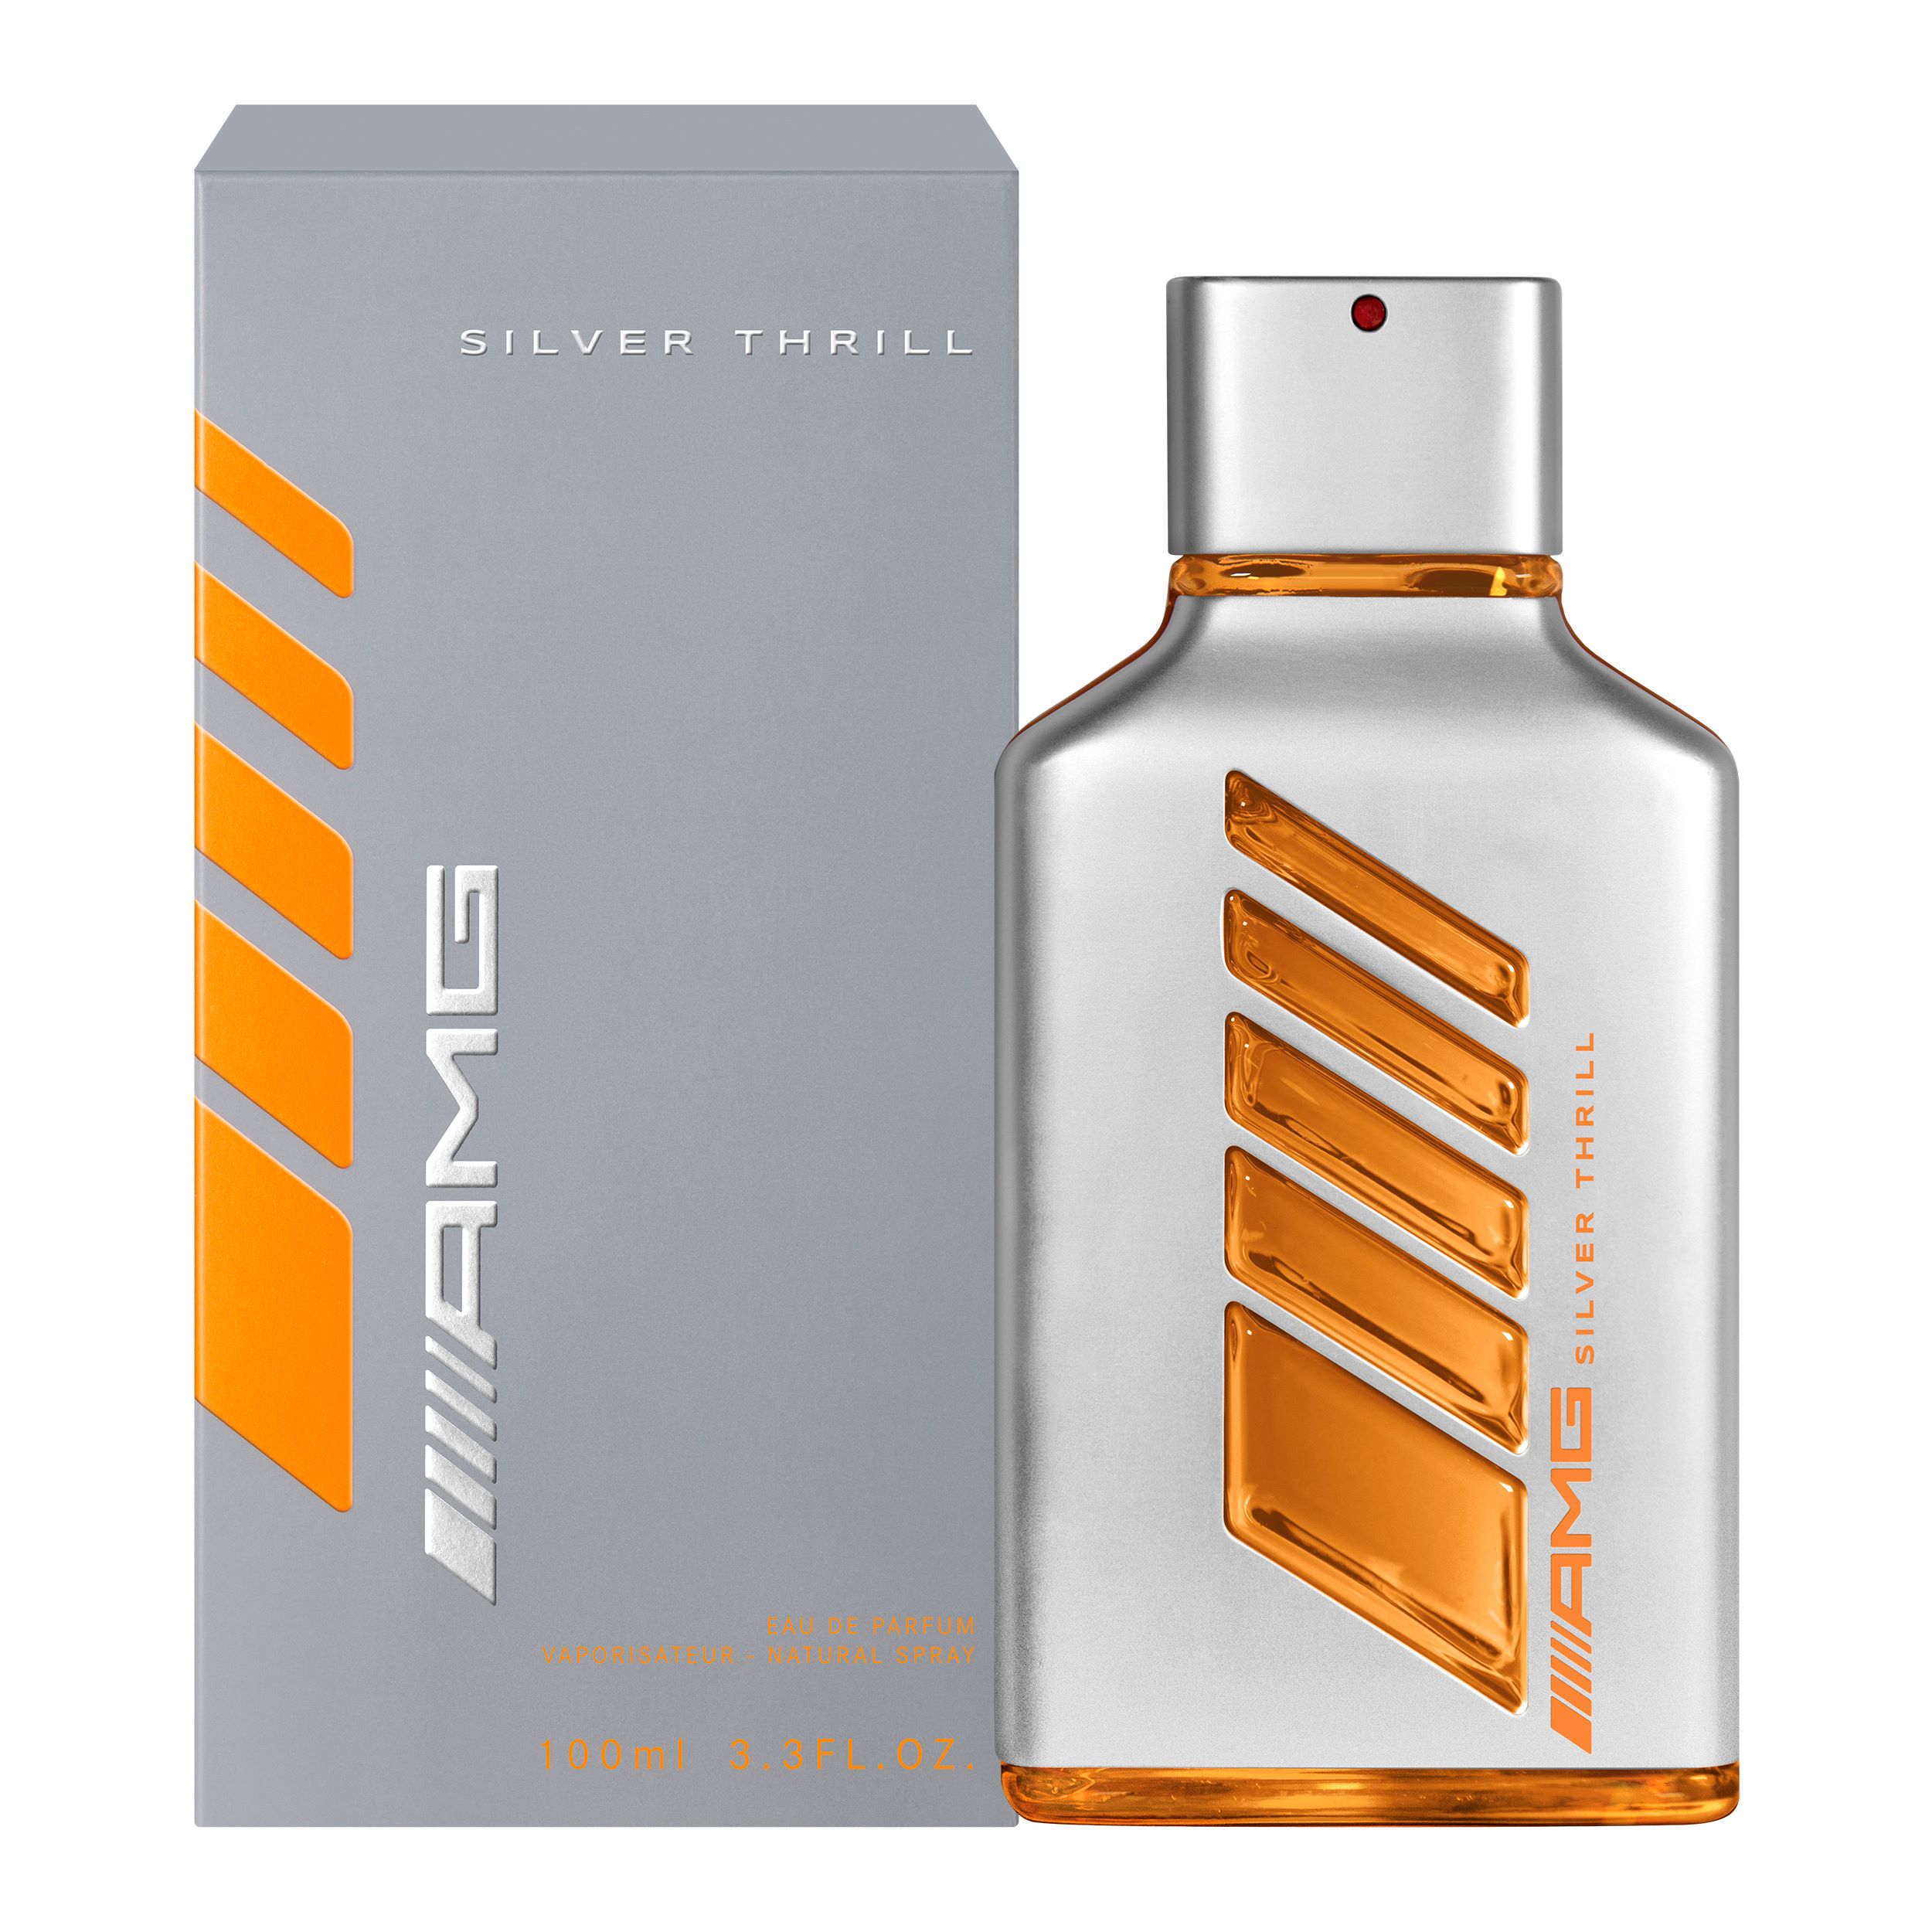 The 'Silver Thrill' perfume from the new Mercedes-AMG fragrance range.